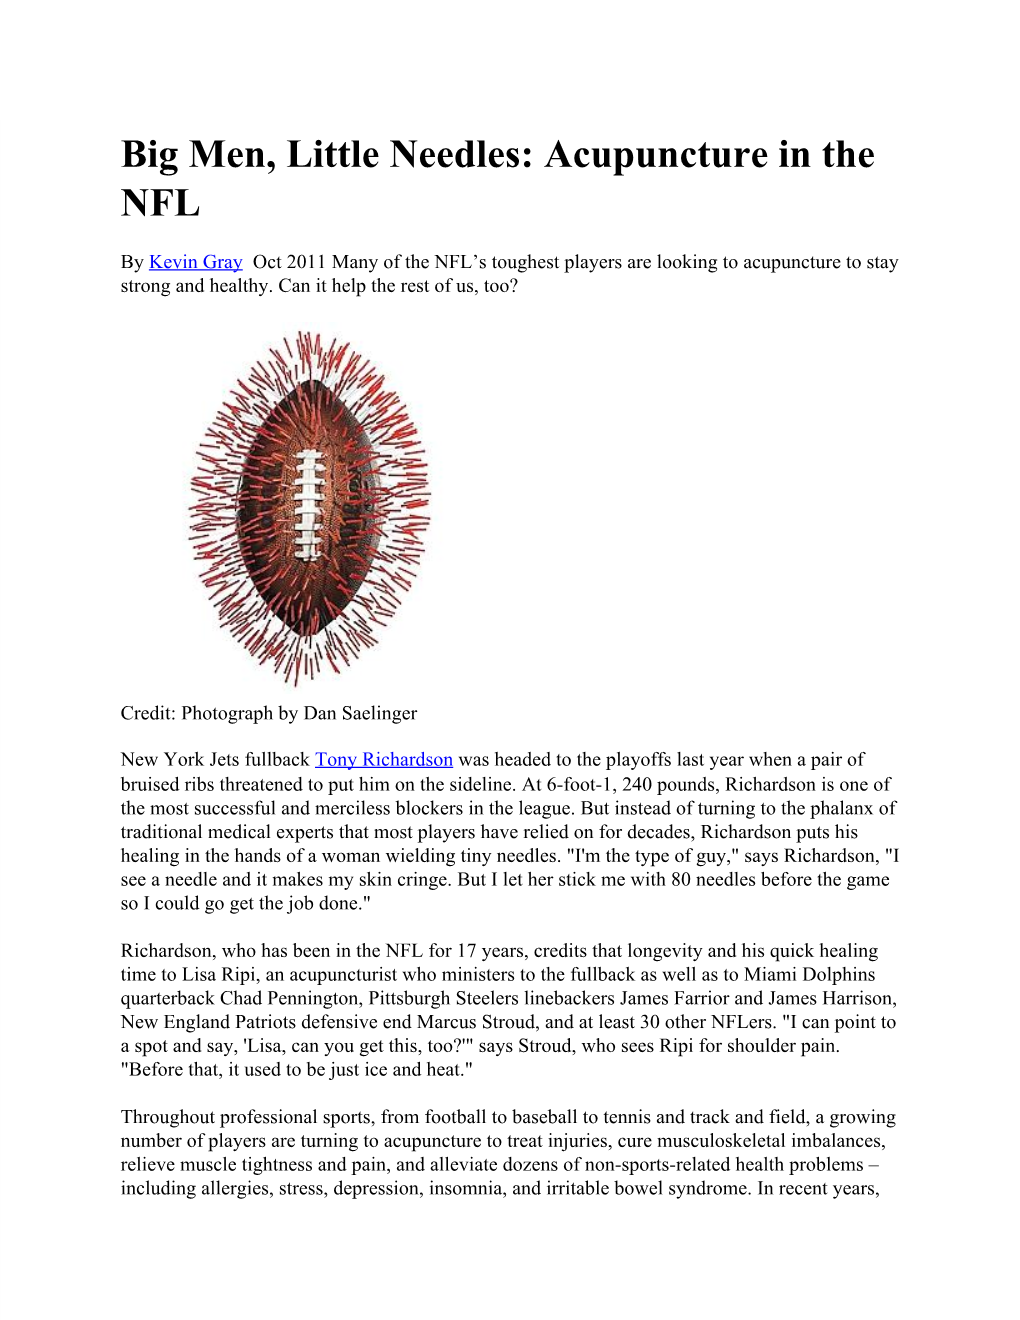 Big Men, Little Needles: Acupuncture in the NFL